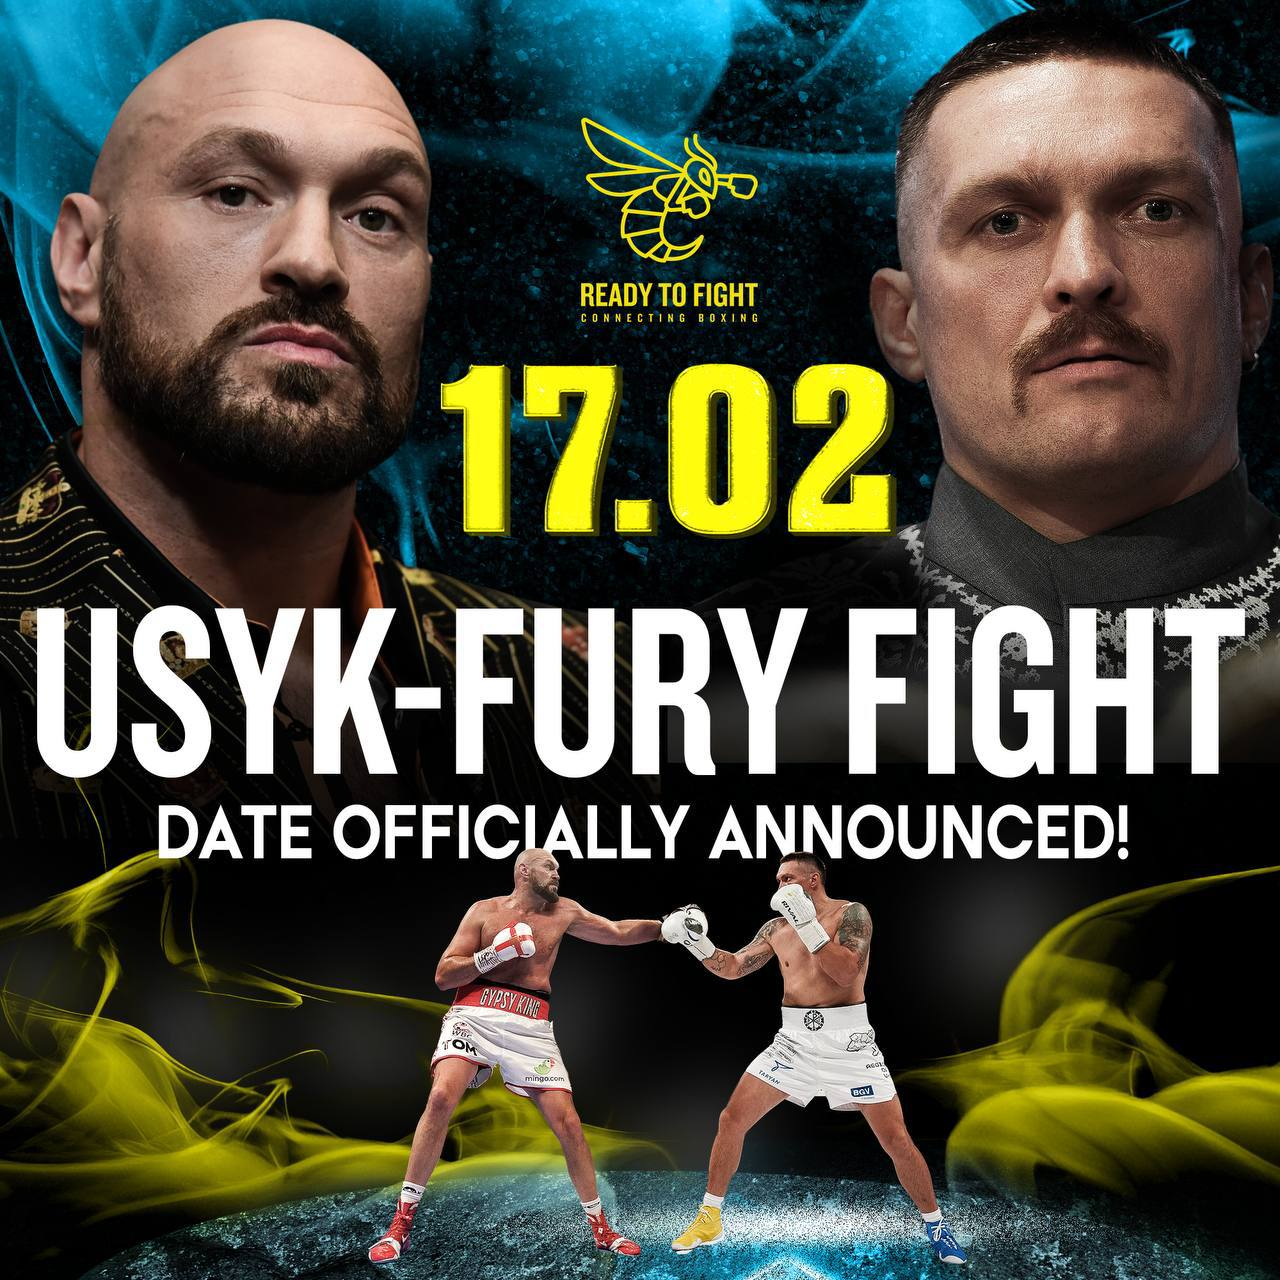 Usik-Fury fight to take place in February